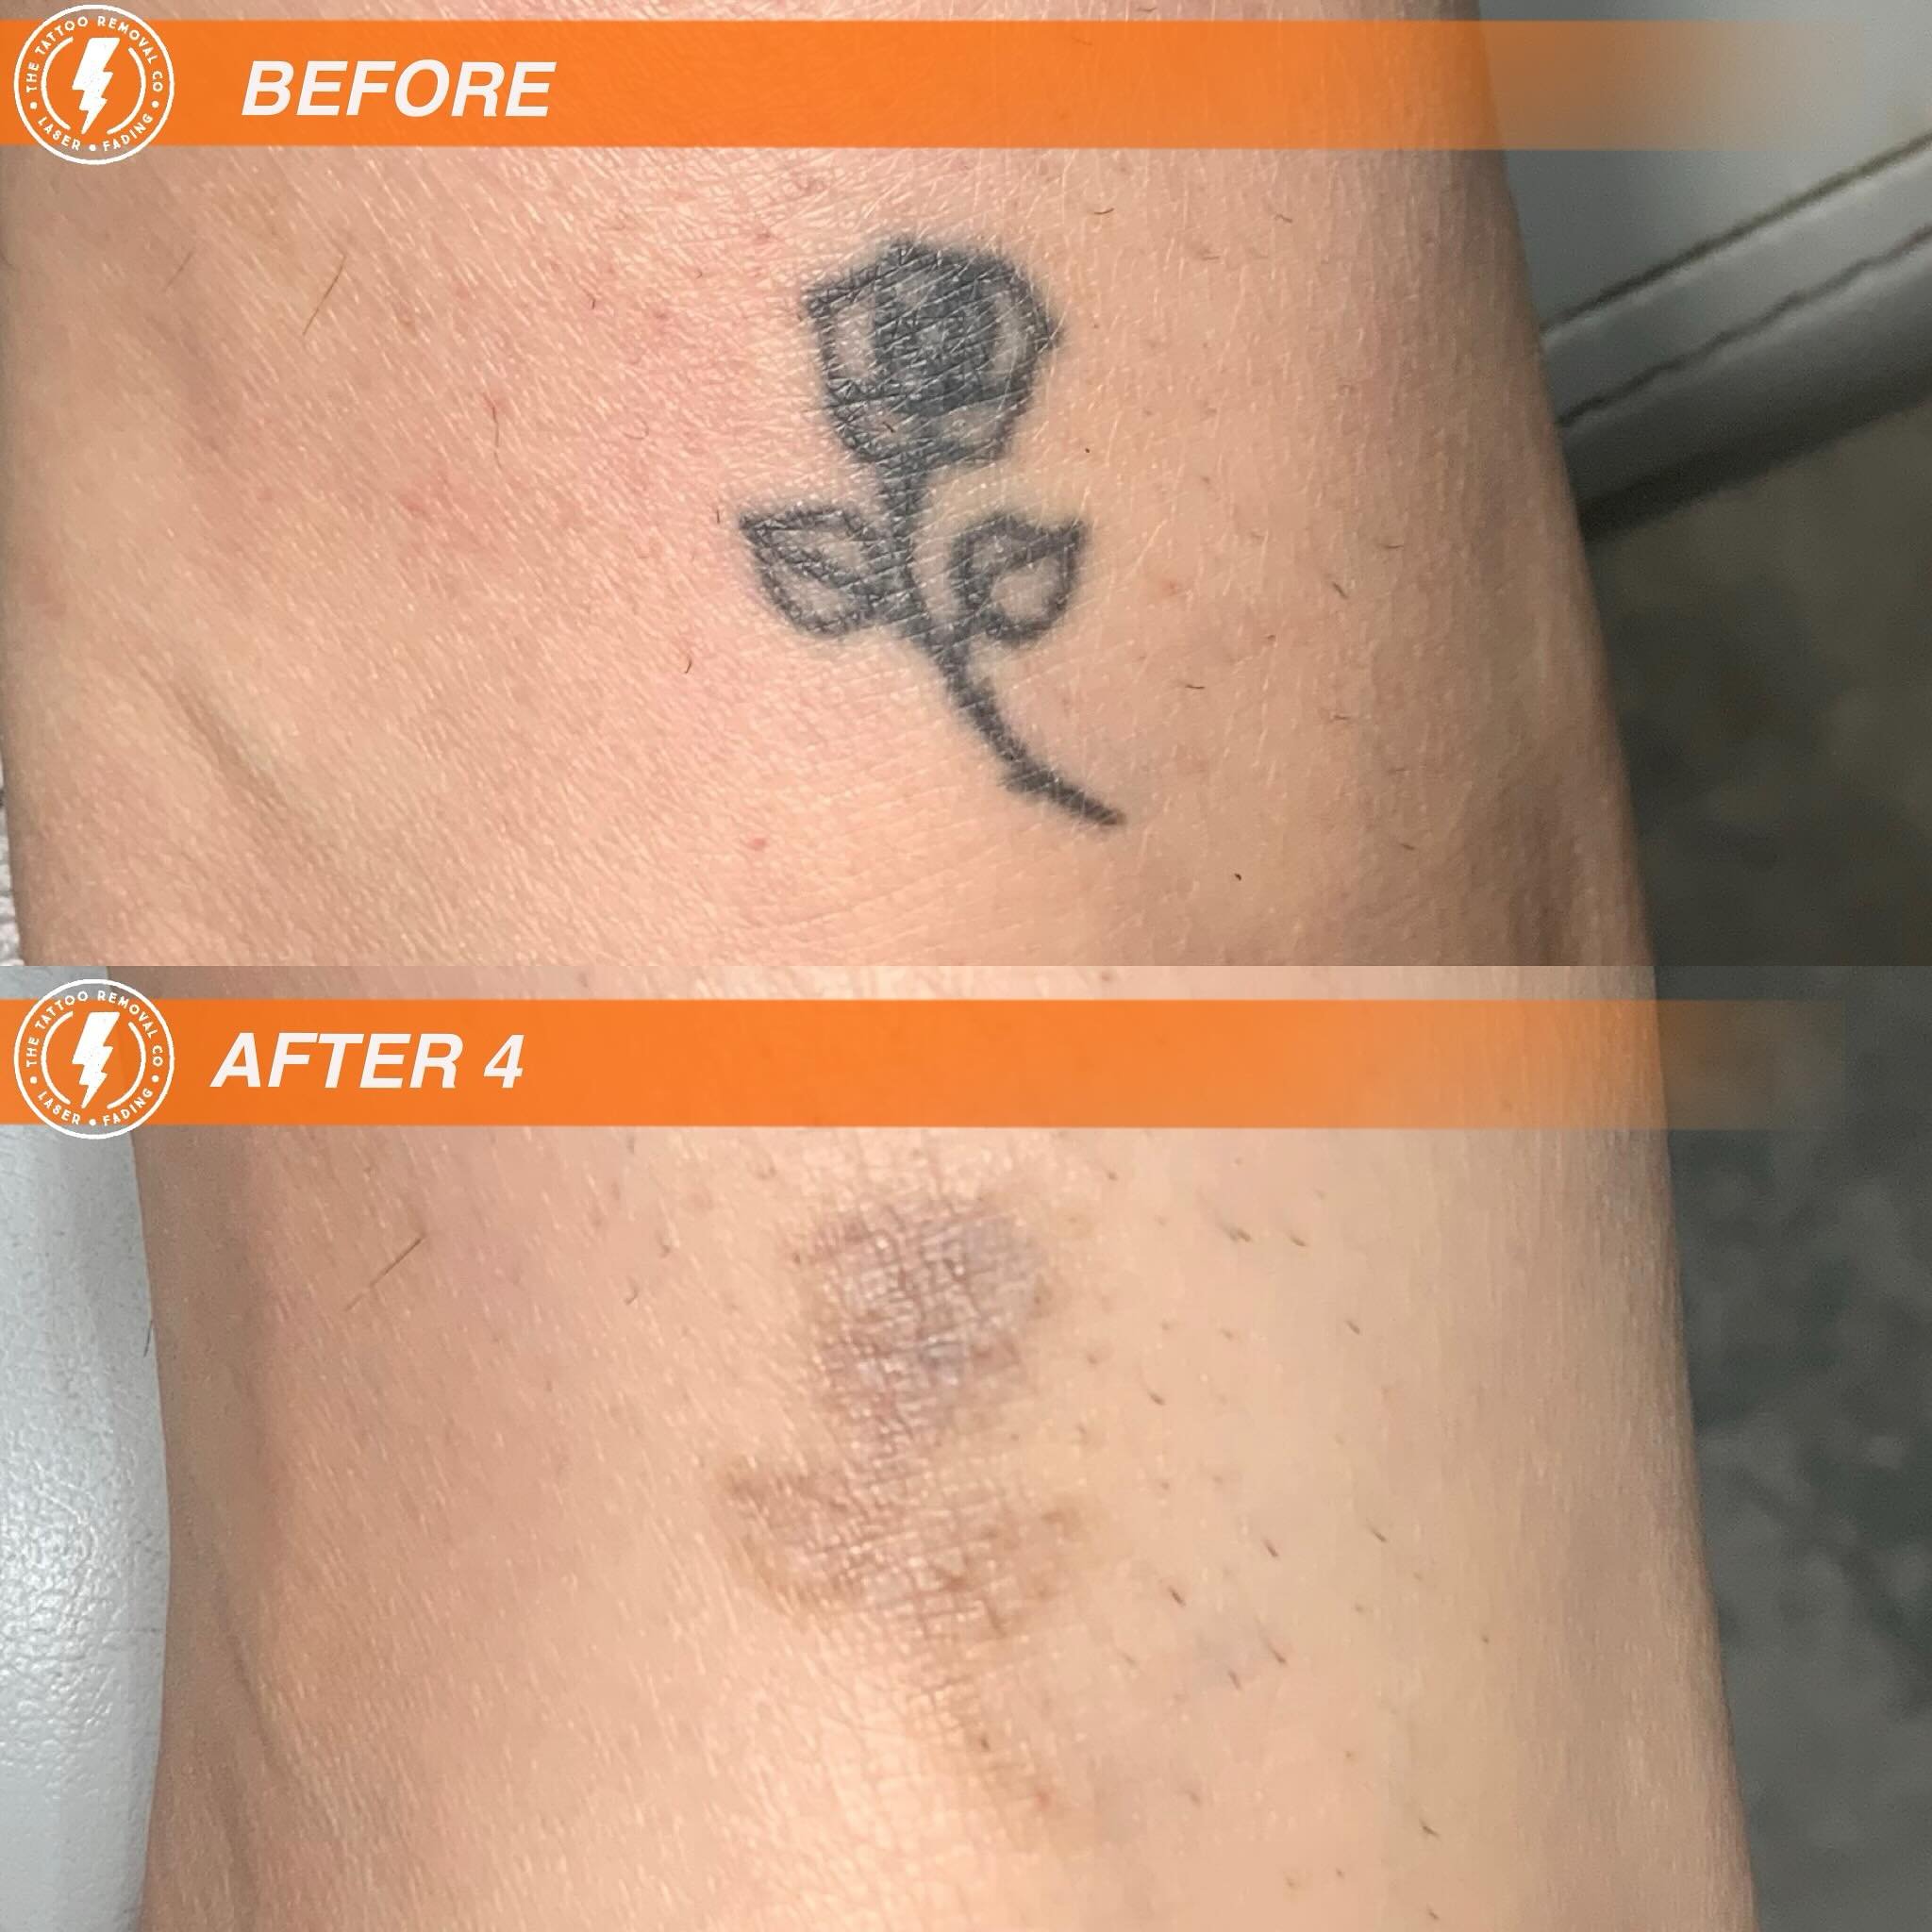 BEFORE/AFTER 4 TREATMENTS💥

Every rose has its thorns until it fades away 🌹

⚡️Fabulous result so far. These are the results you get with our experienced and knowledgeable Laser Technician @philly_ttrc_pagdin ⚡️

Consultations are FREE please don&r